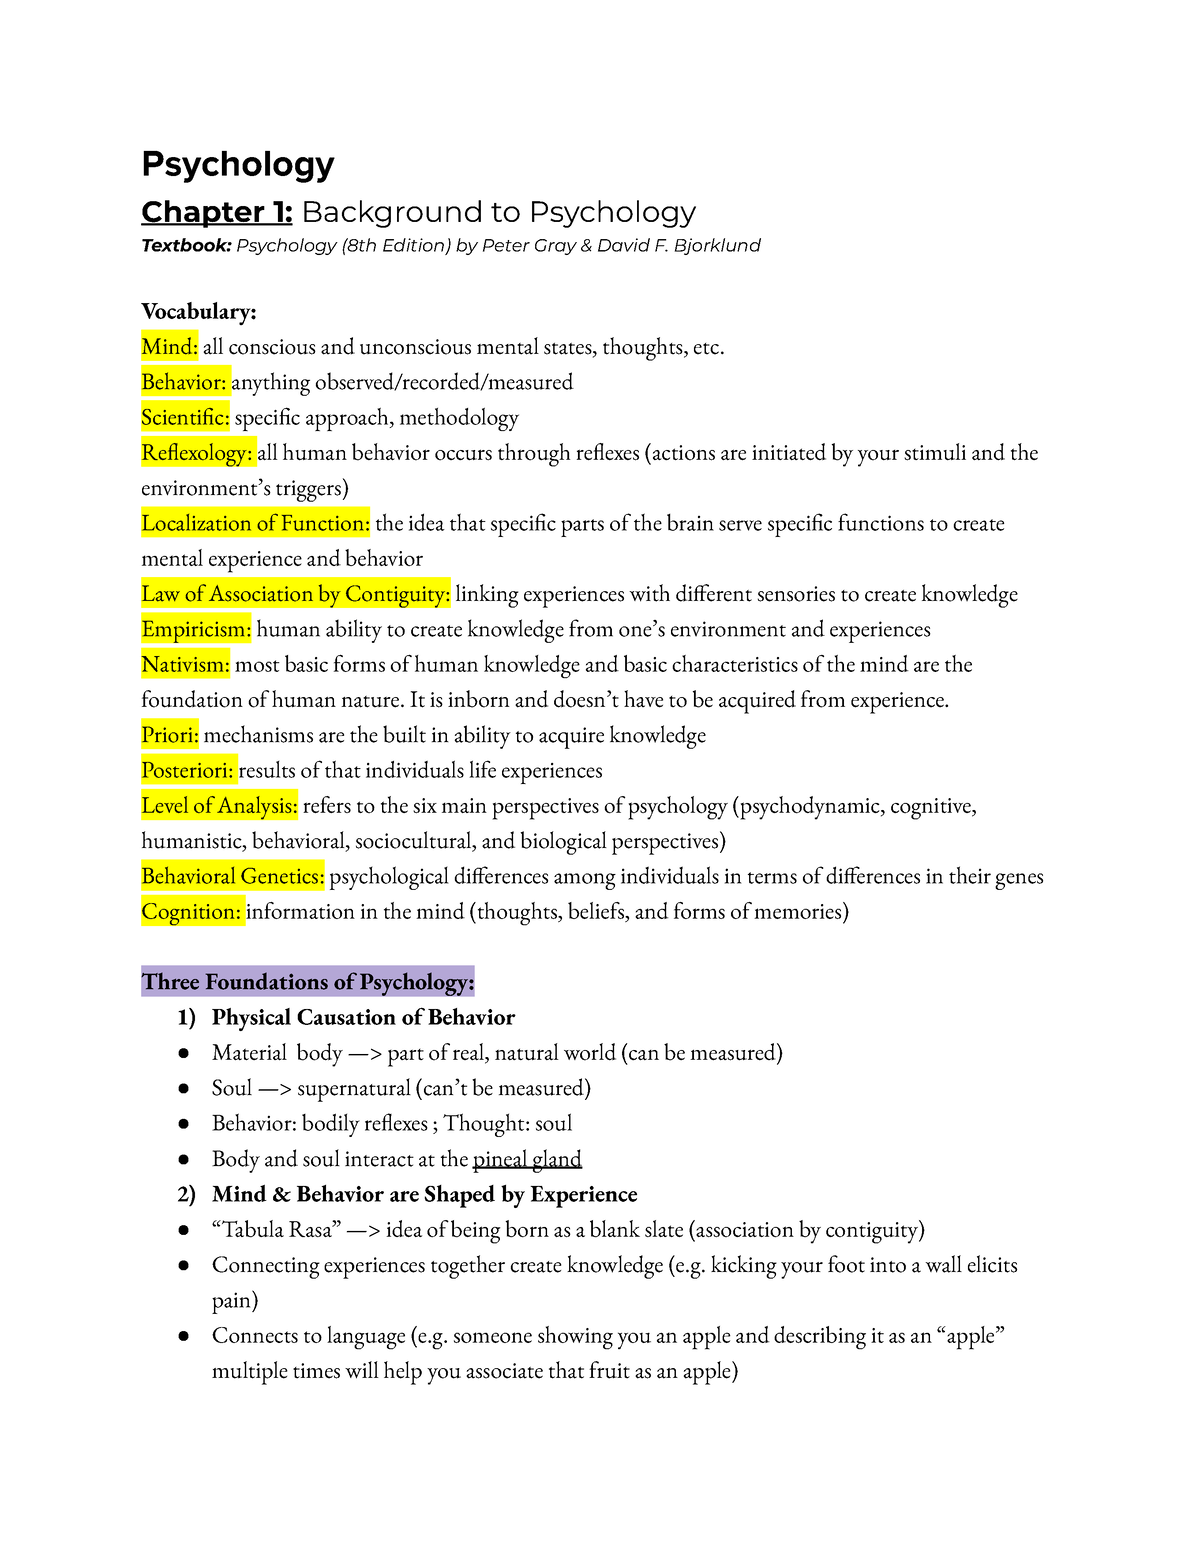 Chapter 1 psyc - My professor was Israel Abramov and I had his course ...